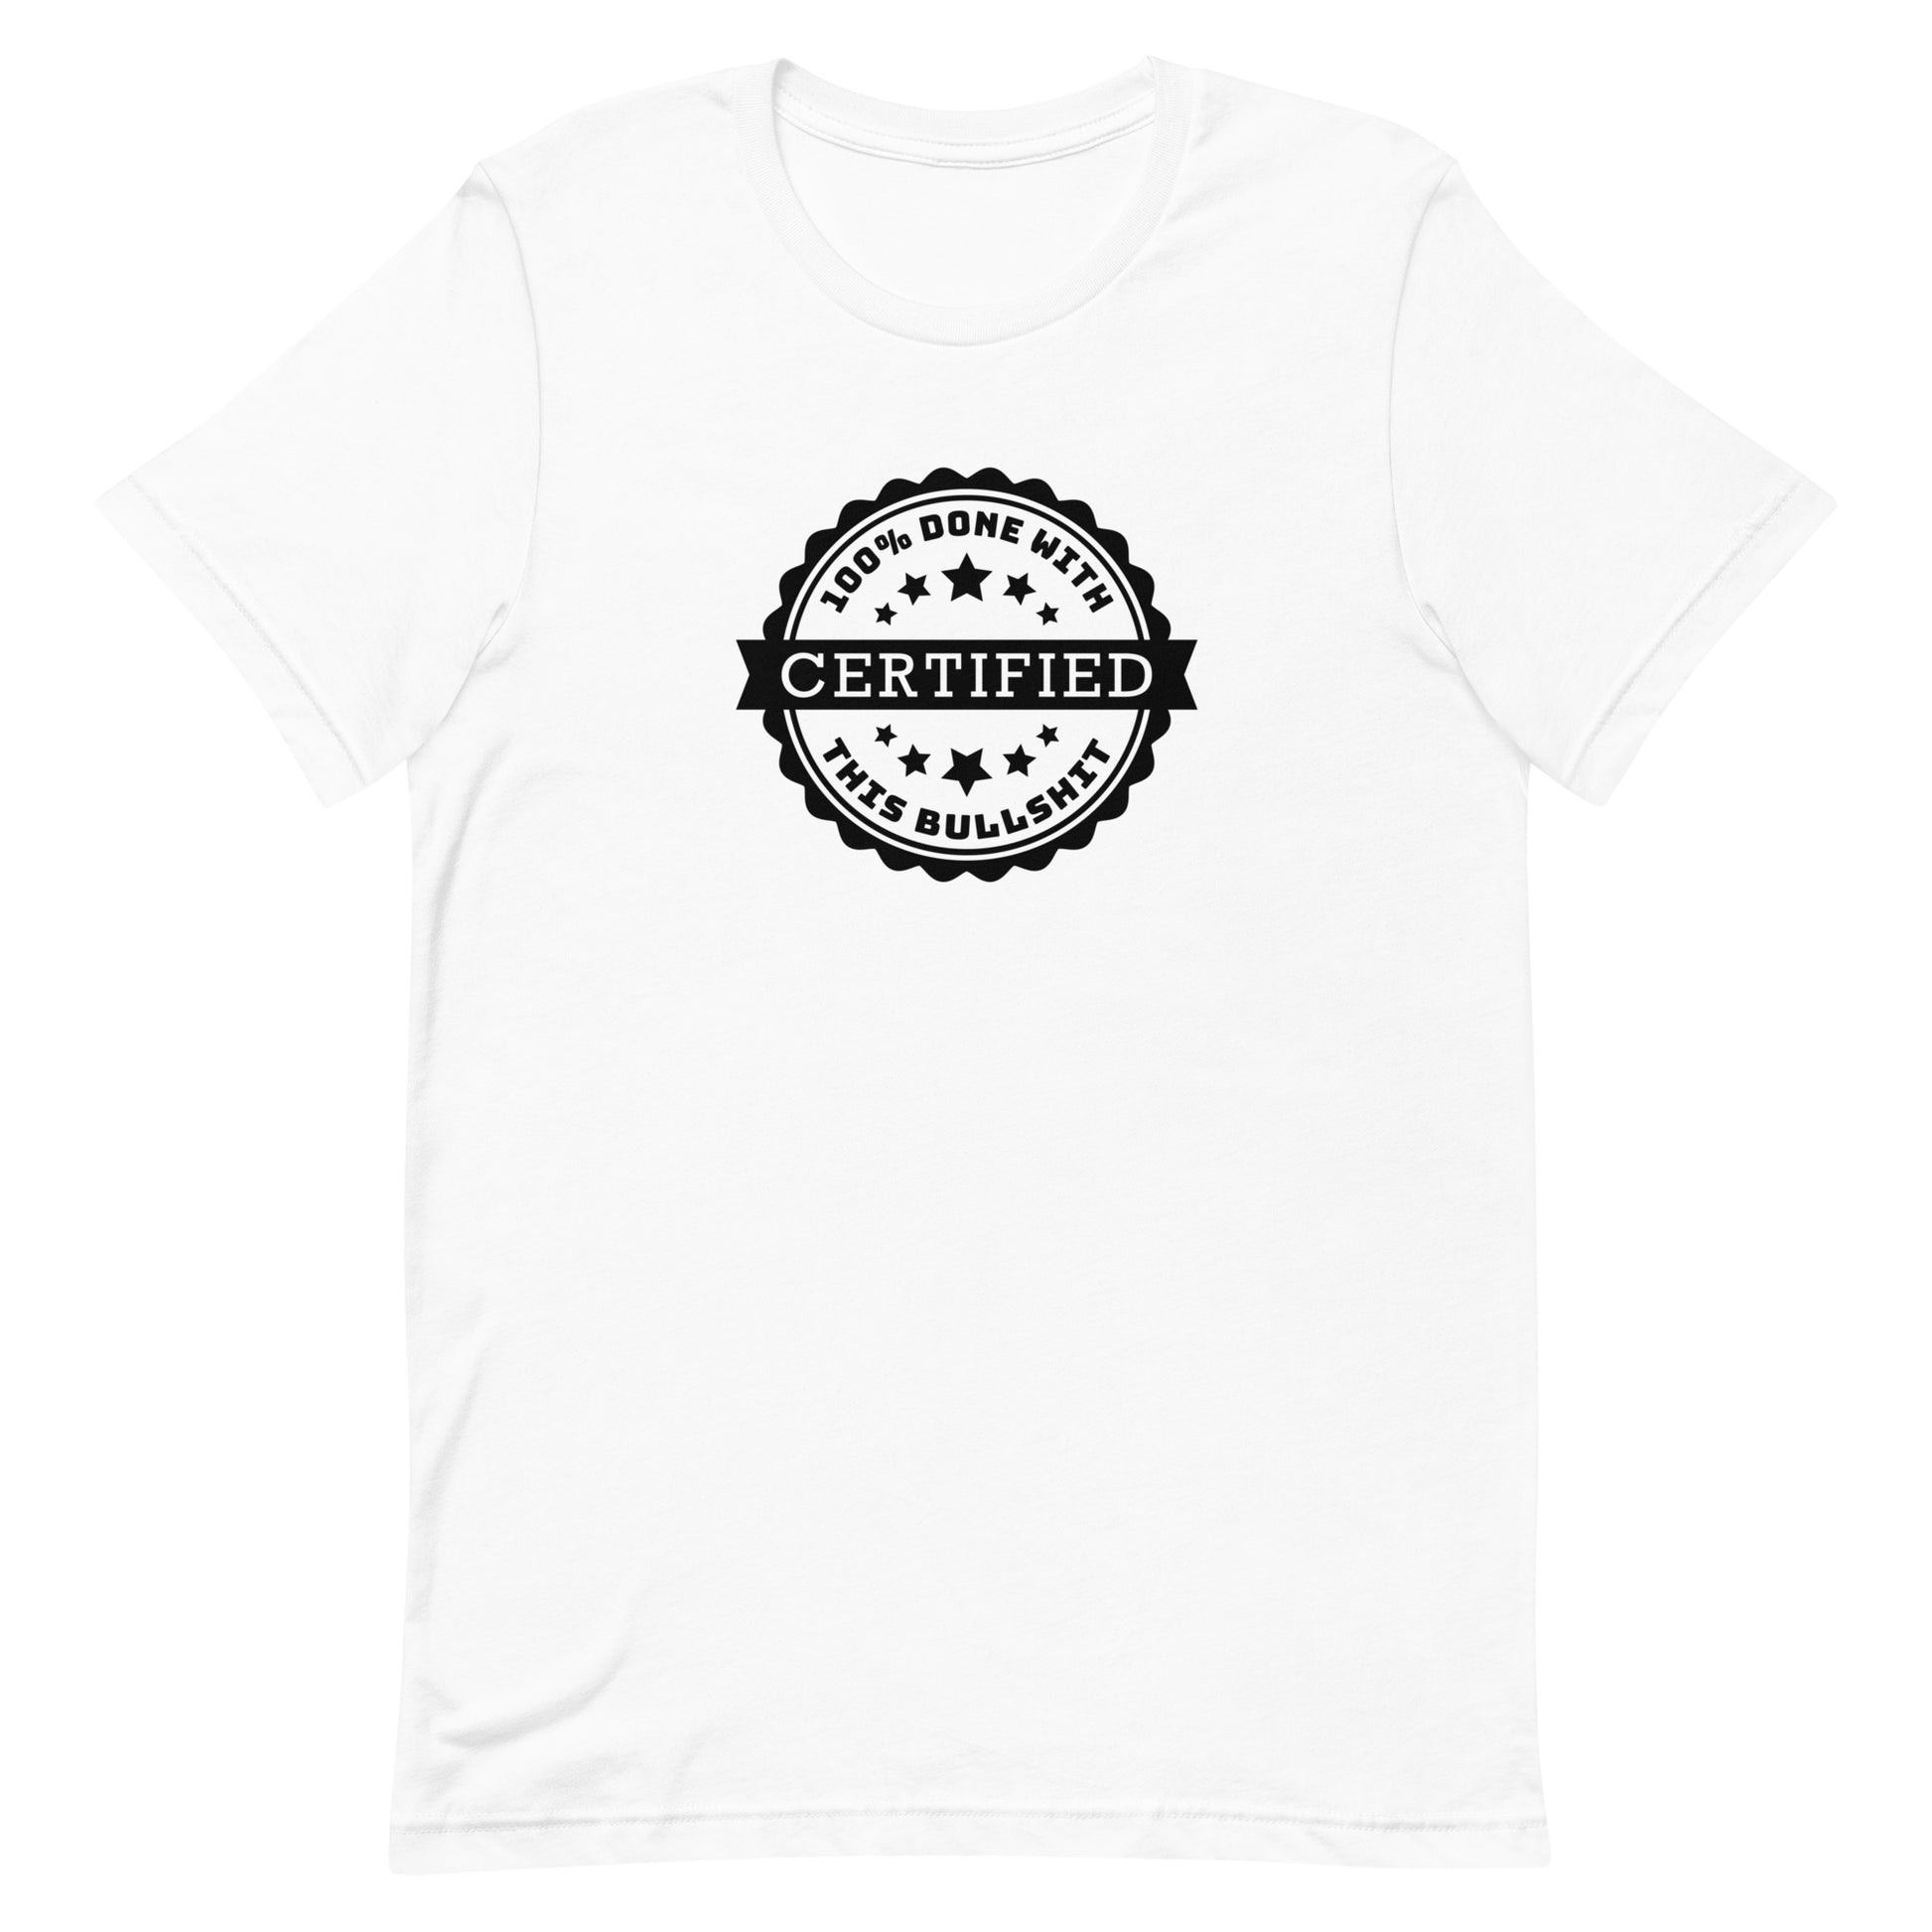 A white crewneck t-shirt featuring an official-looking seal which reads "CERTIFIED 100% done with this bullshit"